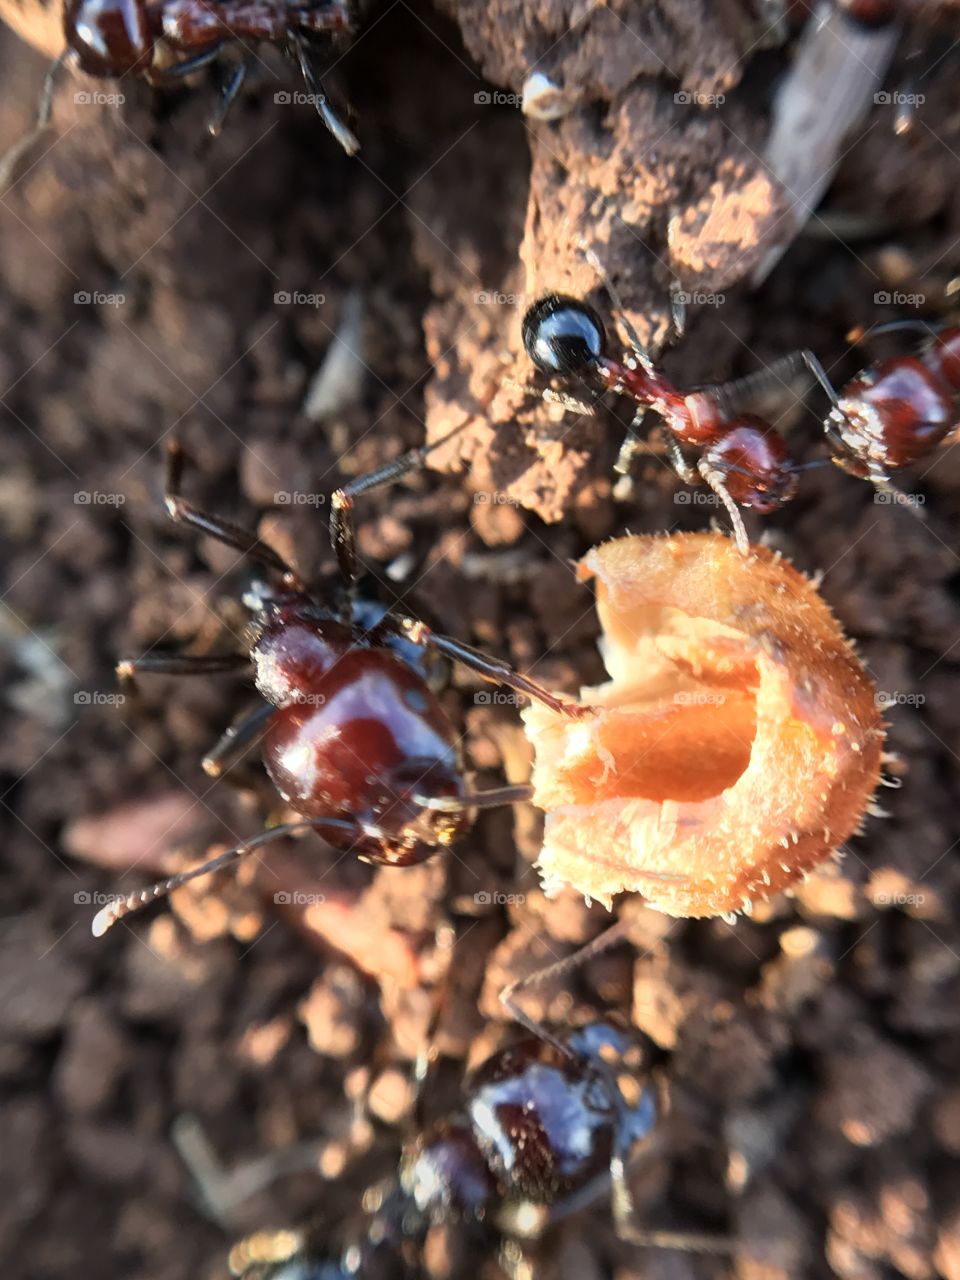 Hungry ants working